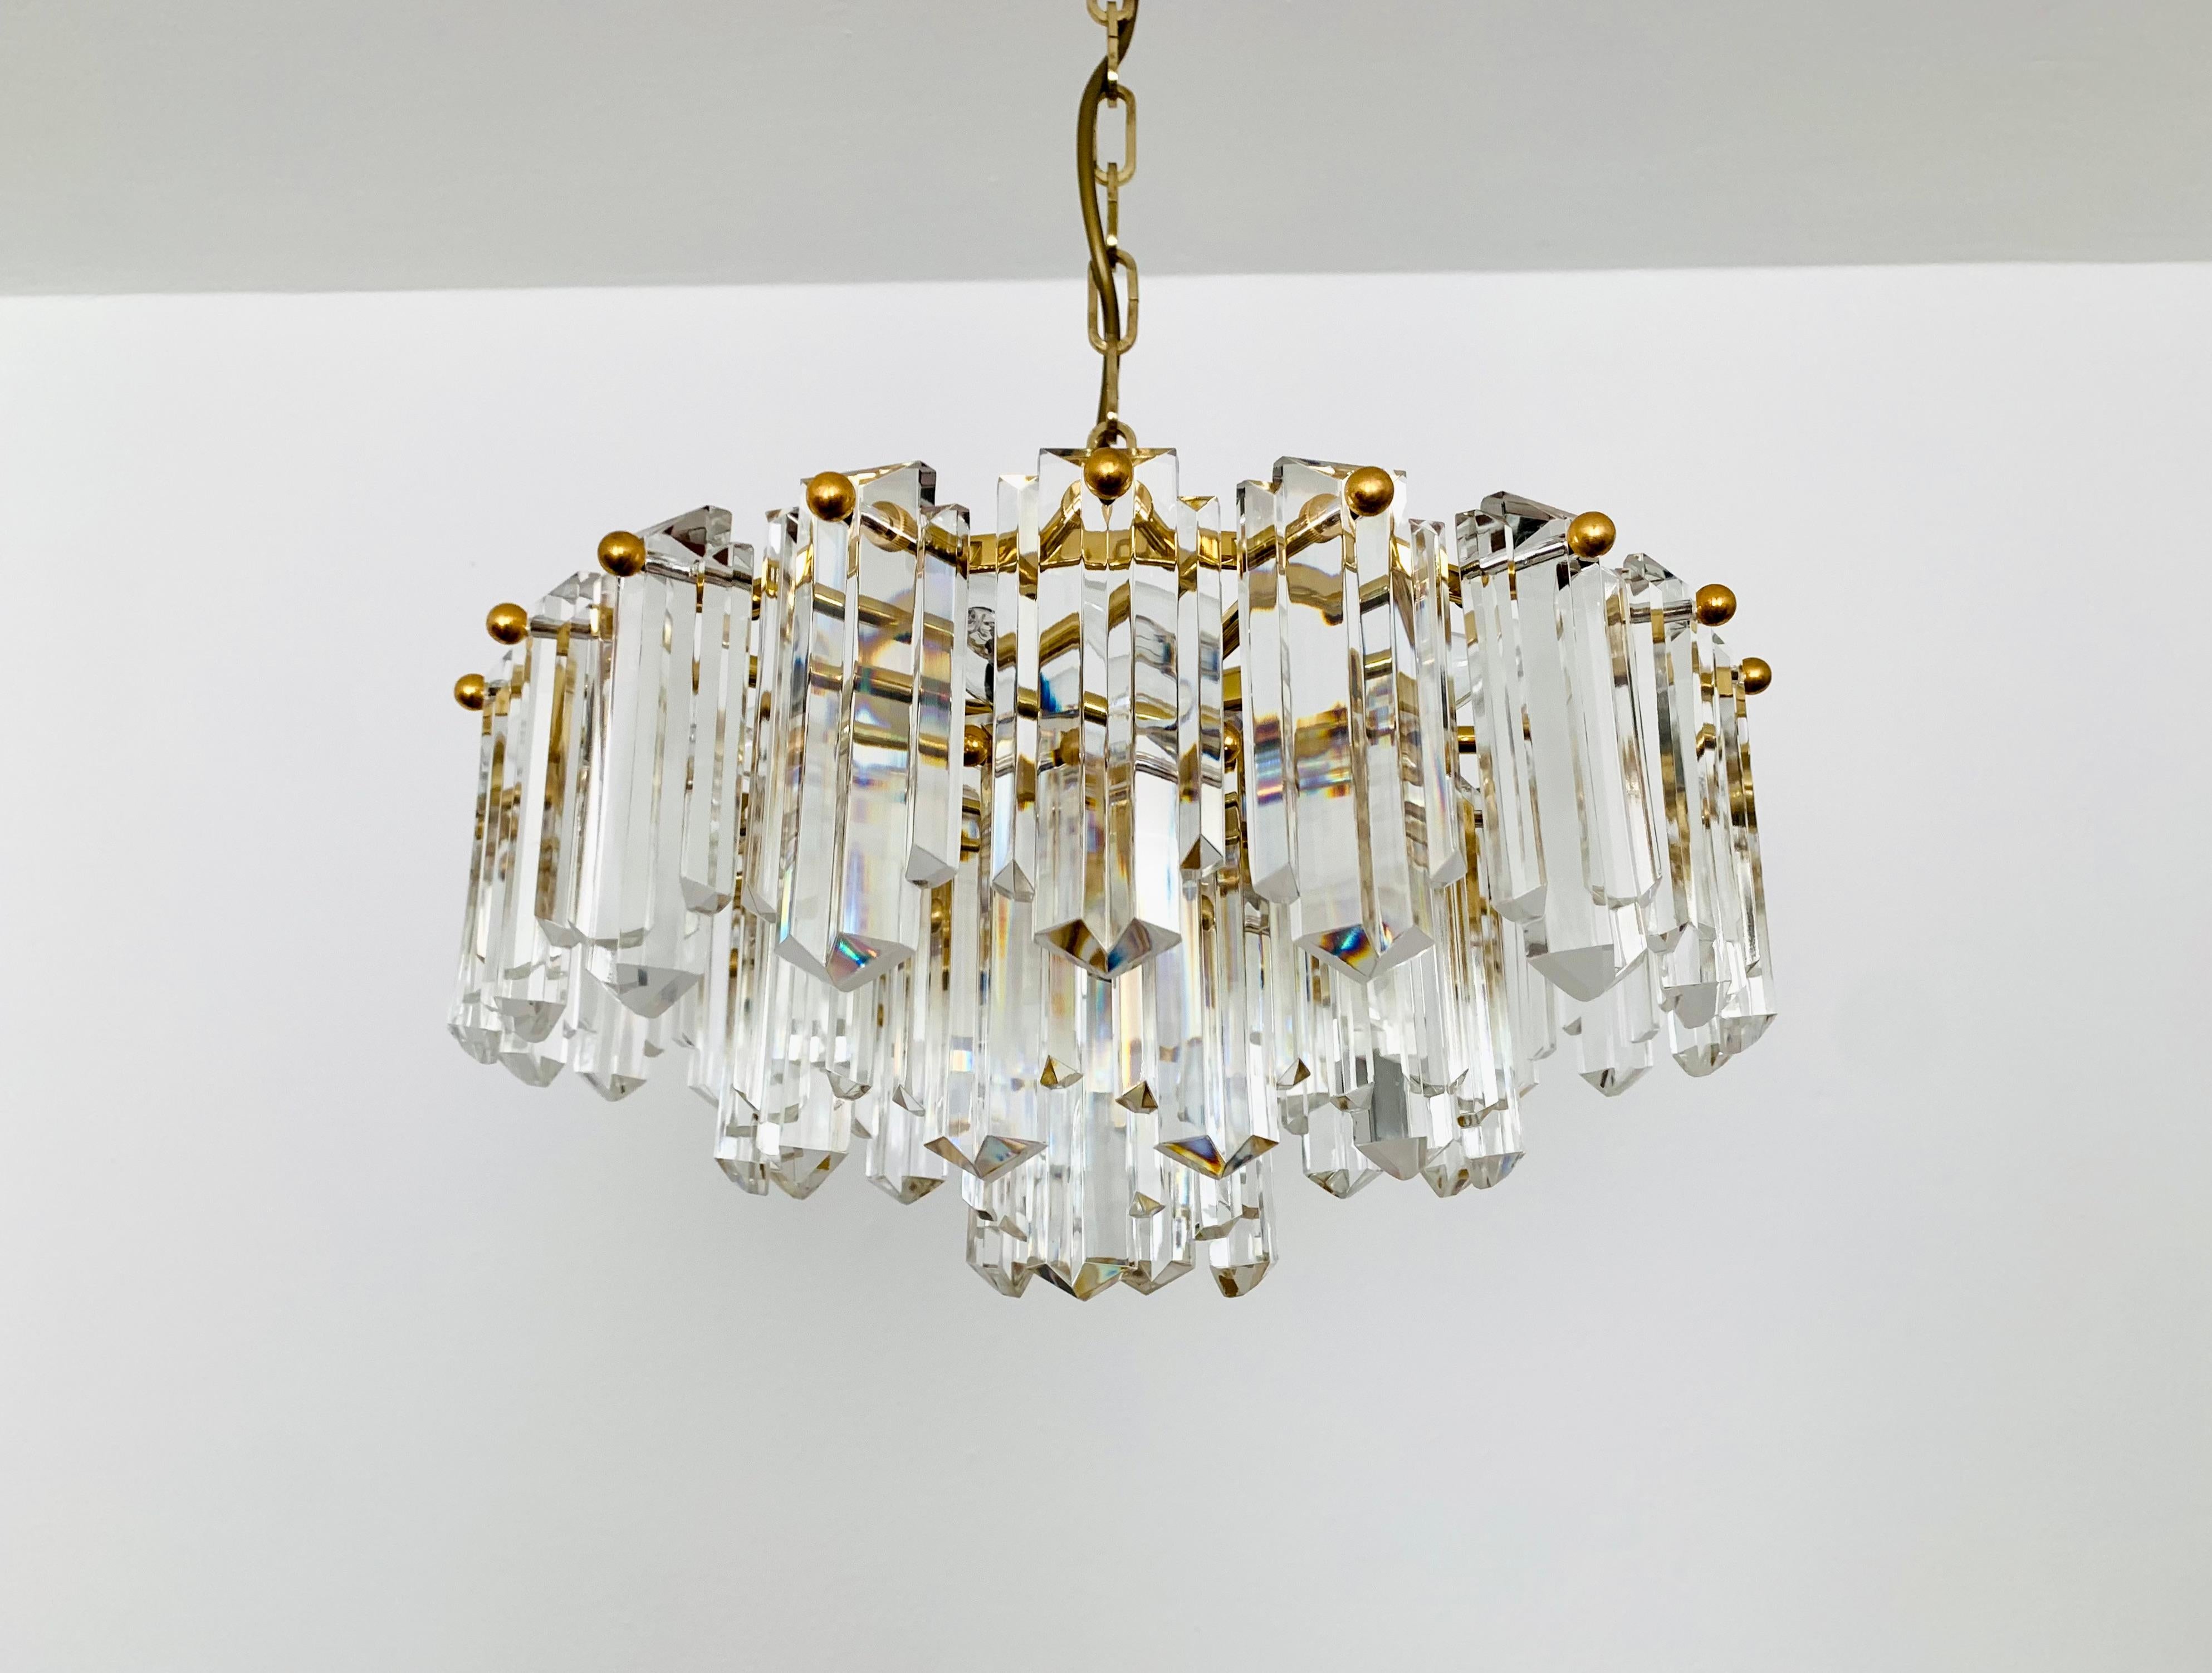 Wonderful chandelier from the 1960s.
The 36 beautifully shaped Art Deco glass elements create an impressive, sparkling play of light.
Exceptionally high-quality workmanship.
Very noble and luxurious appearance and a real eye-catcher for every